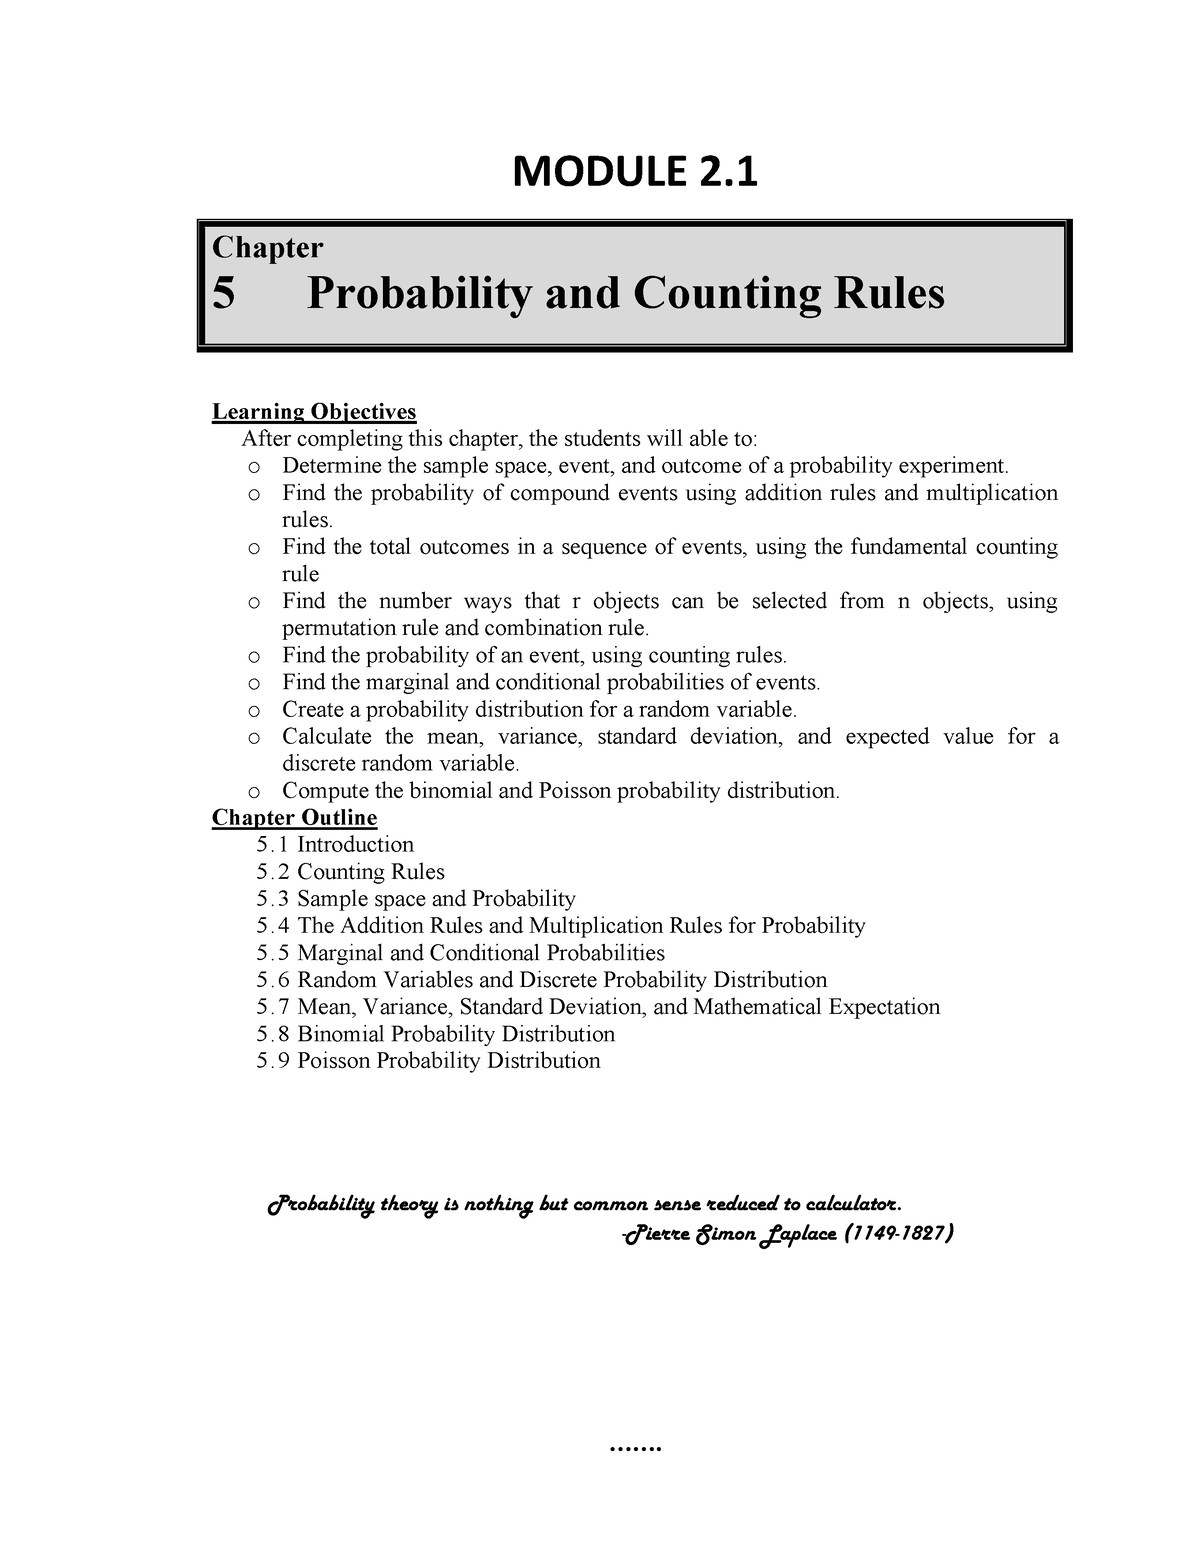 eda-module-5-probability-counting-rules-module-2-chapter-5